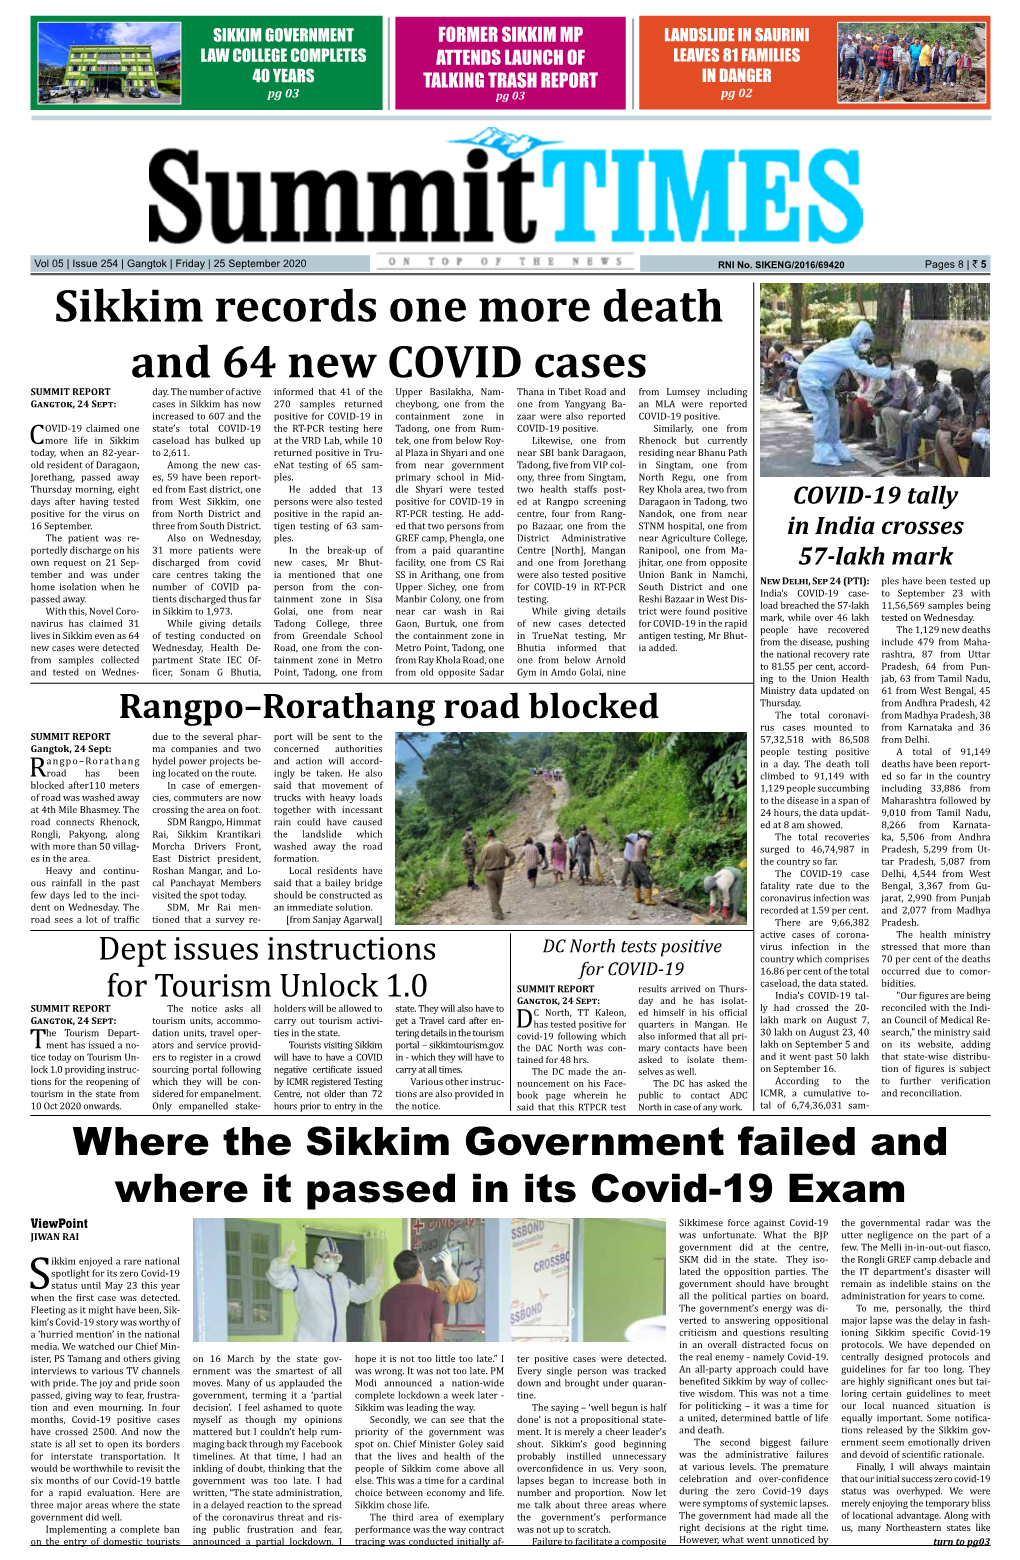 Sikkim Records One More Death and 64 New COVID Cases SUMMIT REPORT Informed That 41 of the - Thana in Tibet Road and Gangtok, 24 Sept: - Day